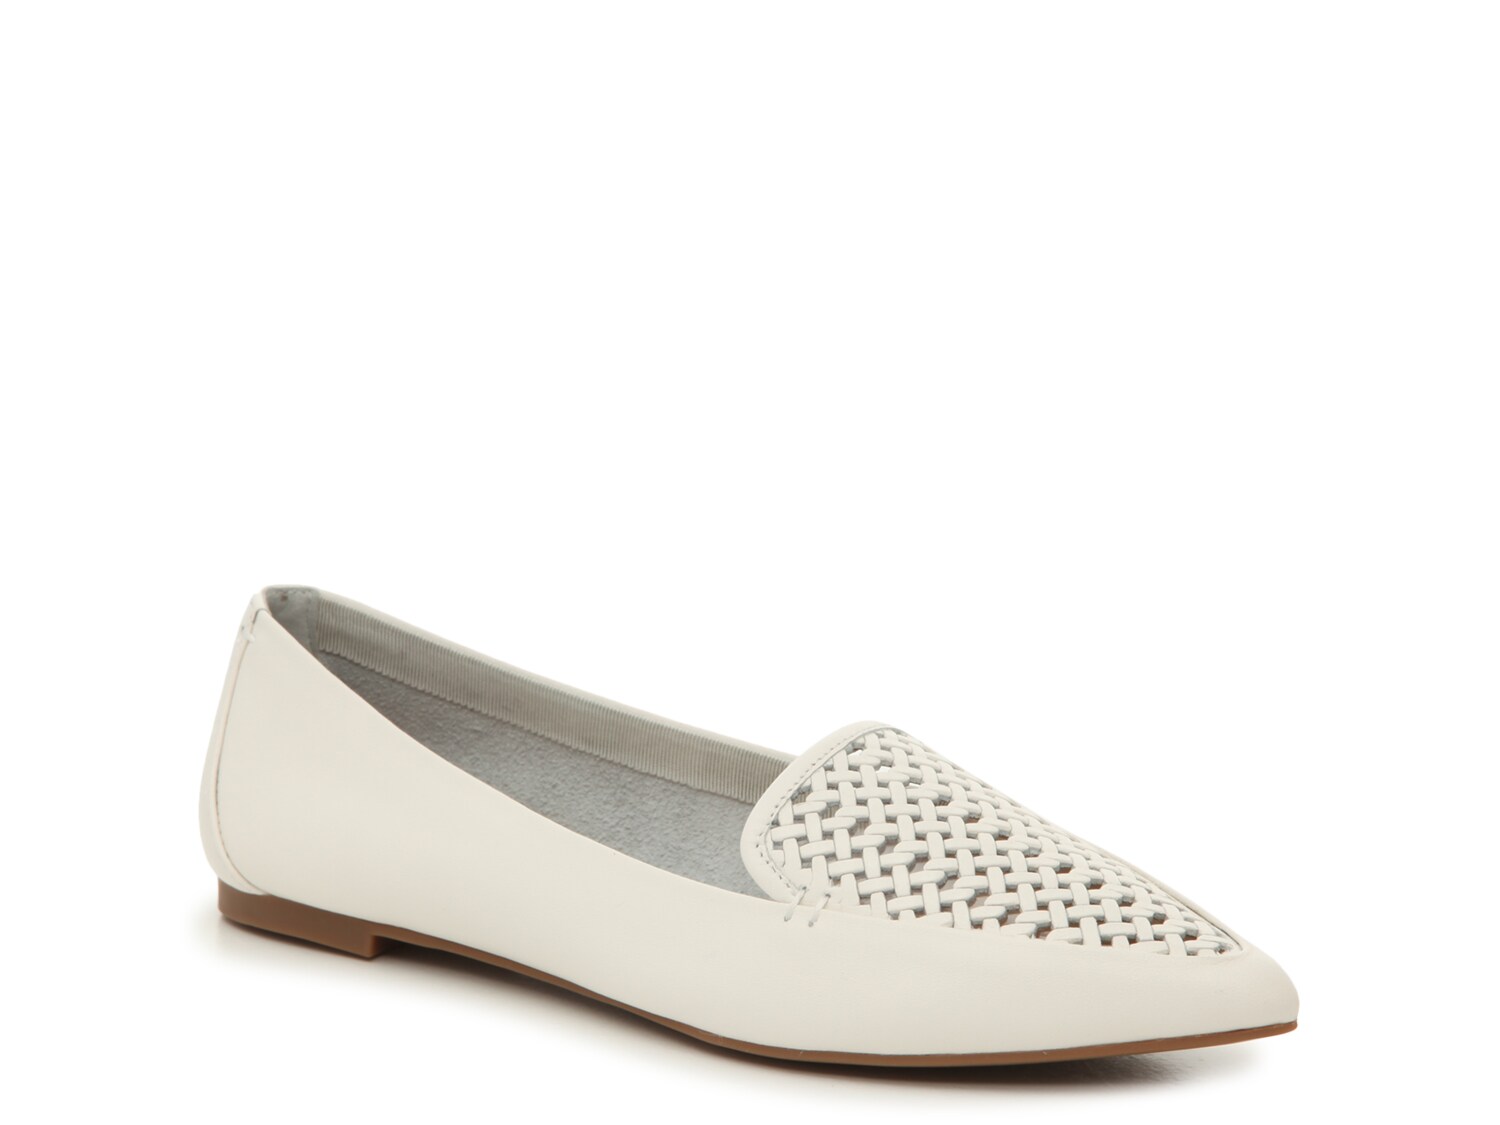 Essex Lane Aleanor Loafer - Free Shipping | DSW